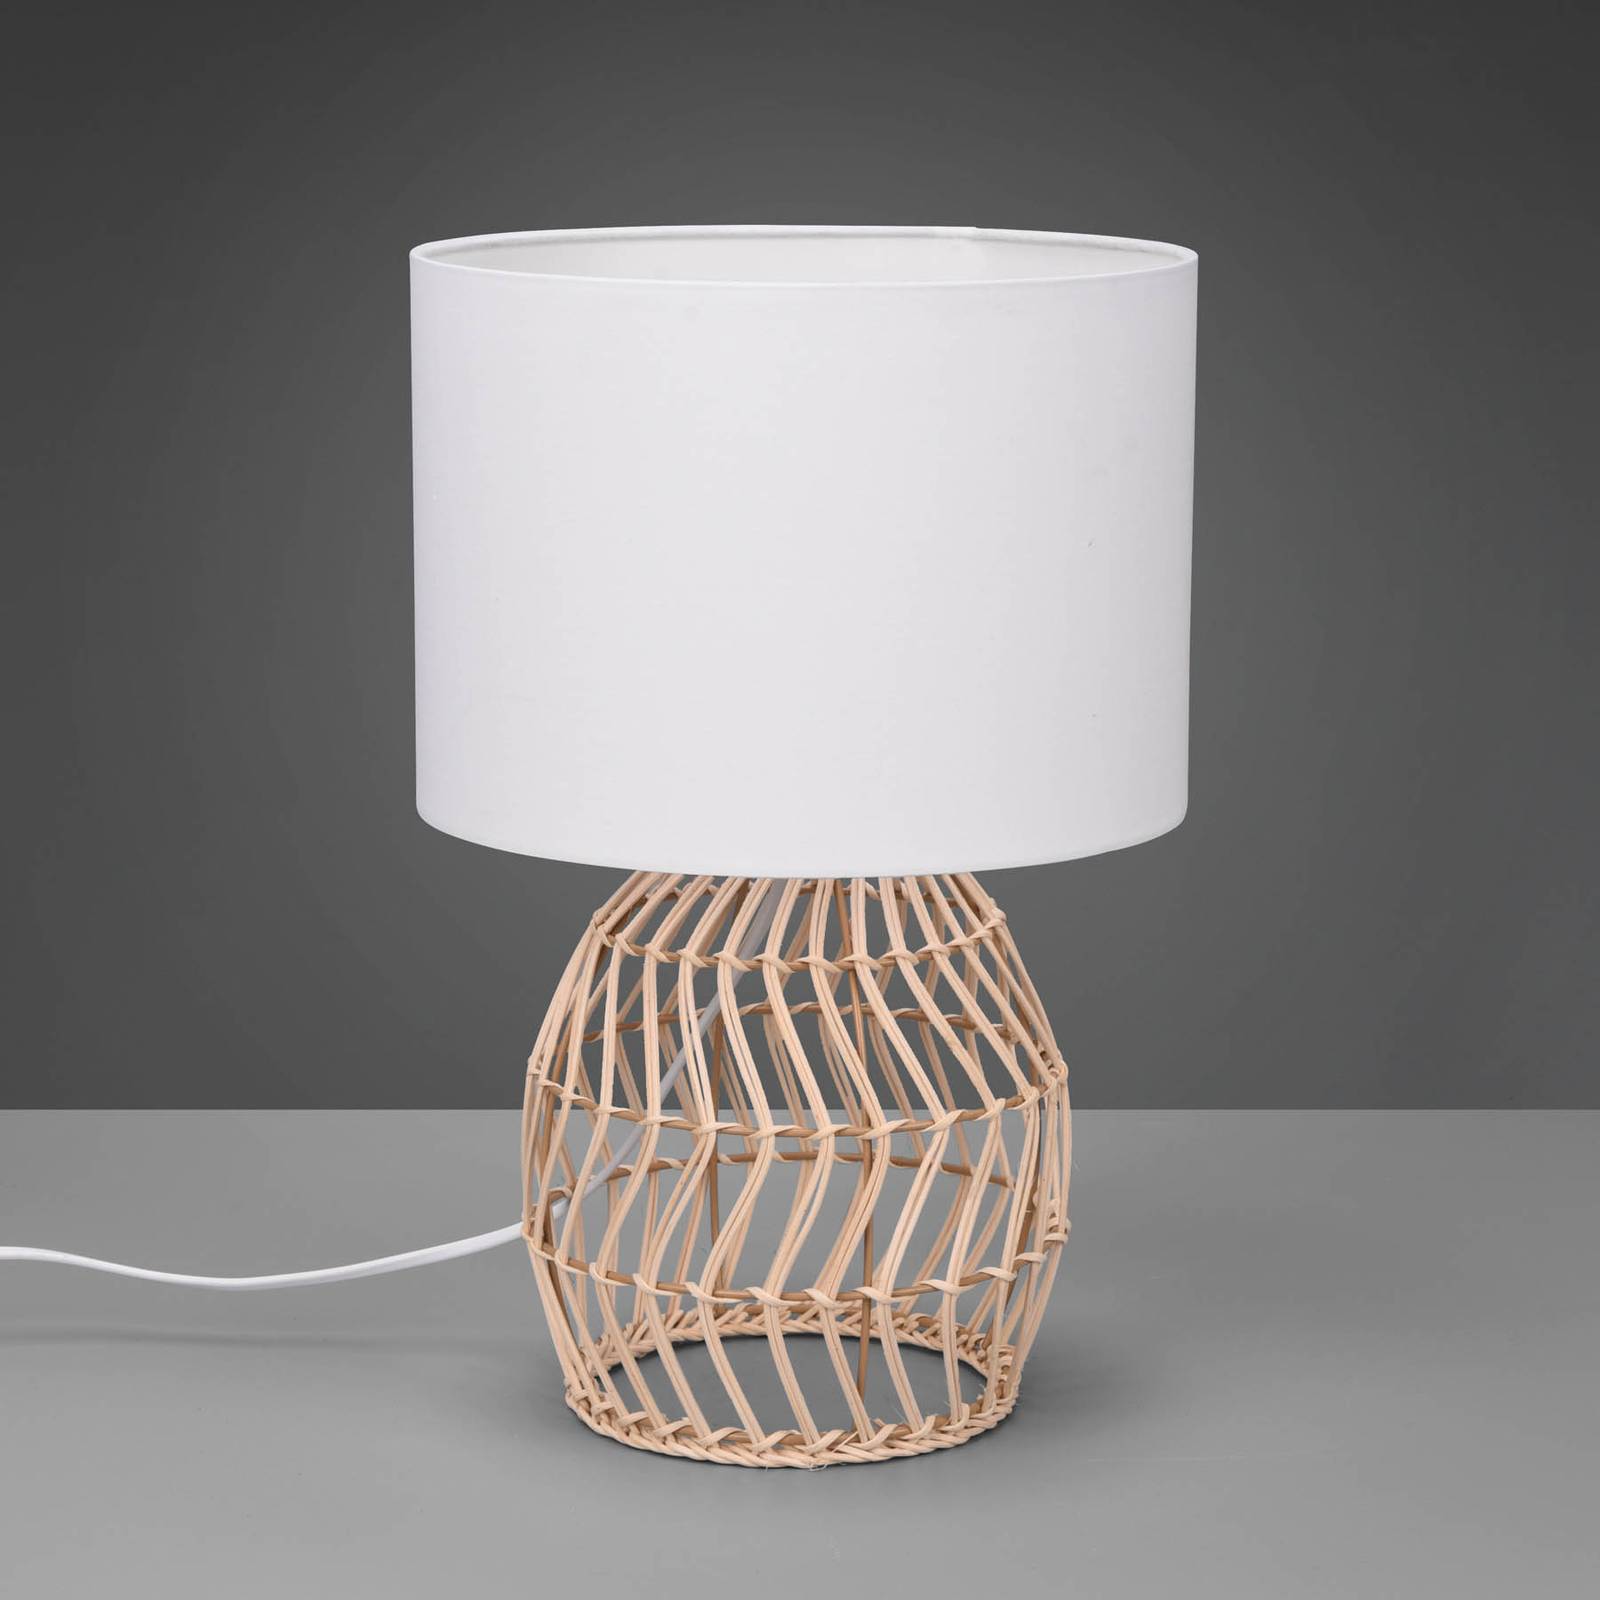 Reality Leuchten Rike table lamp, rattan frame and fabric lampshade